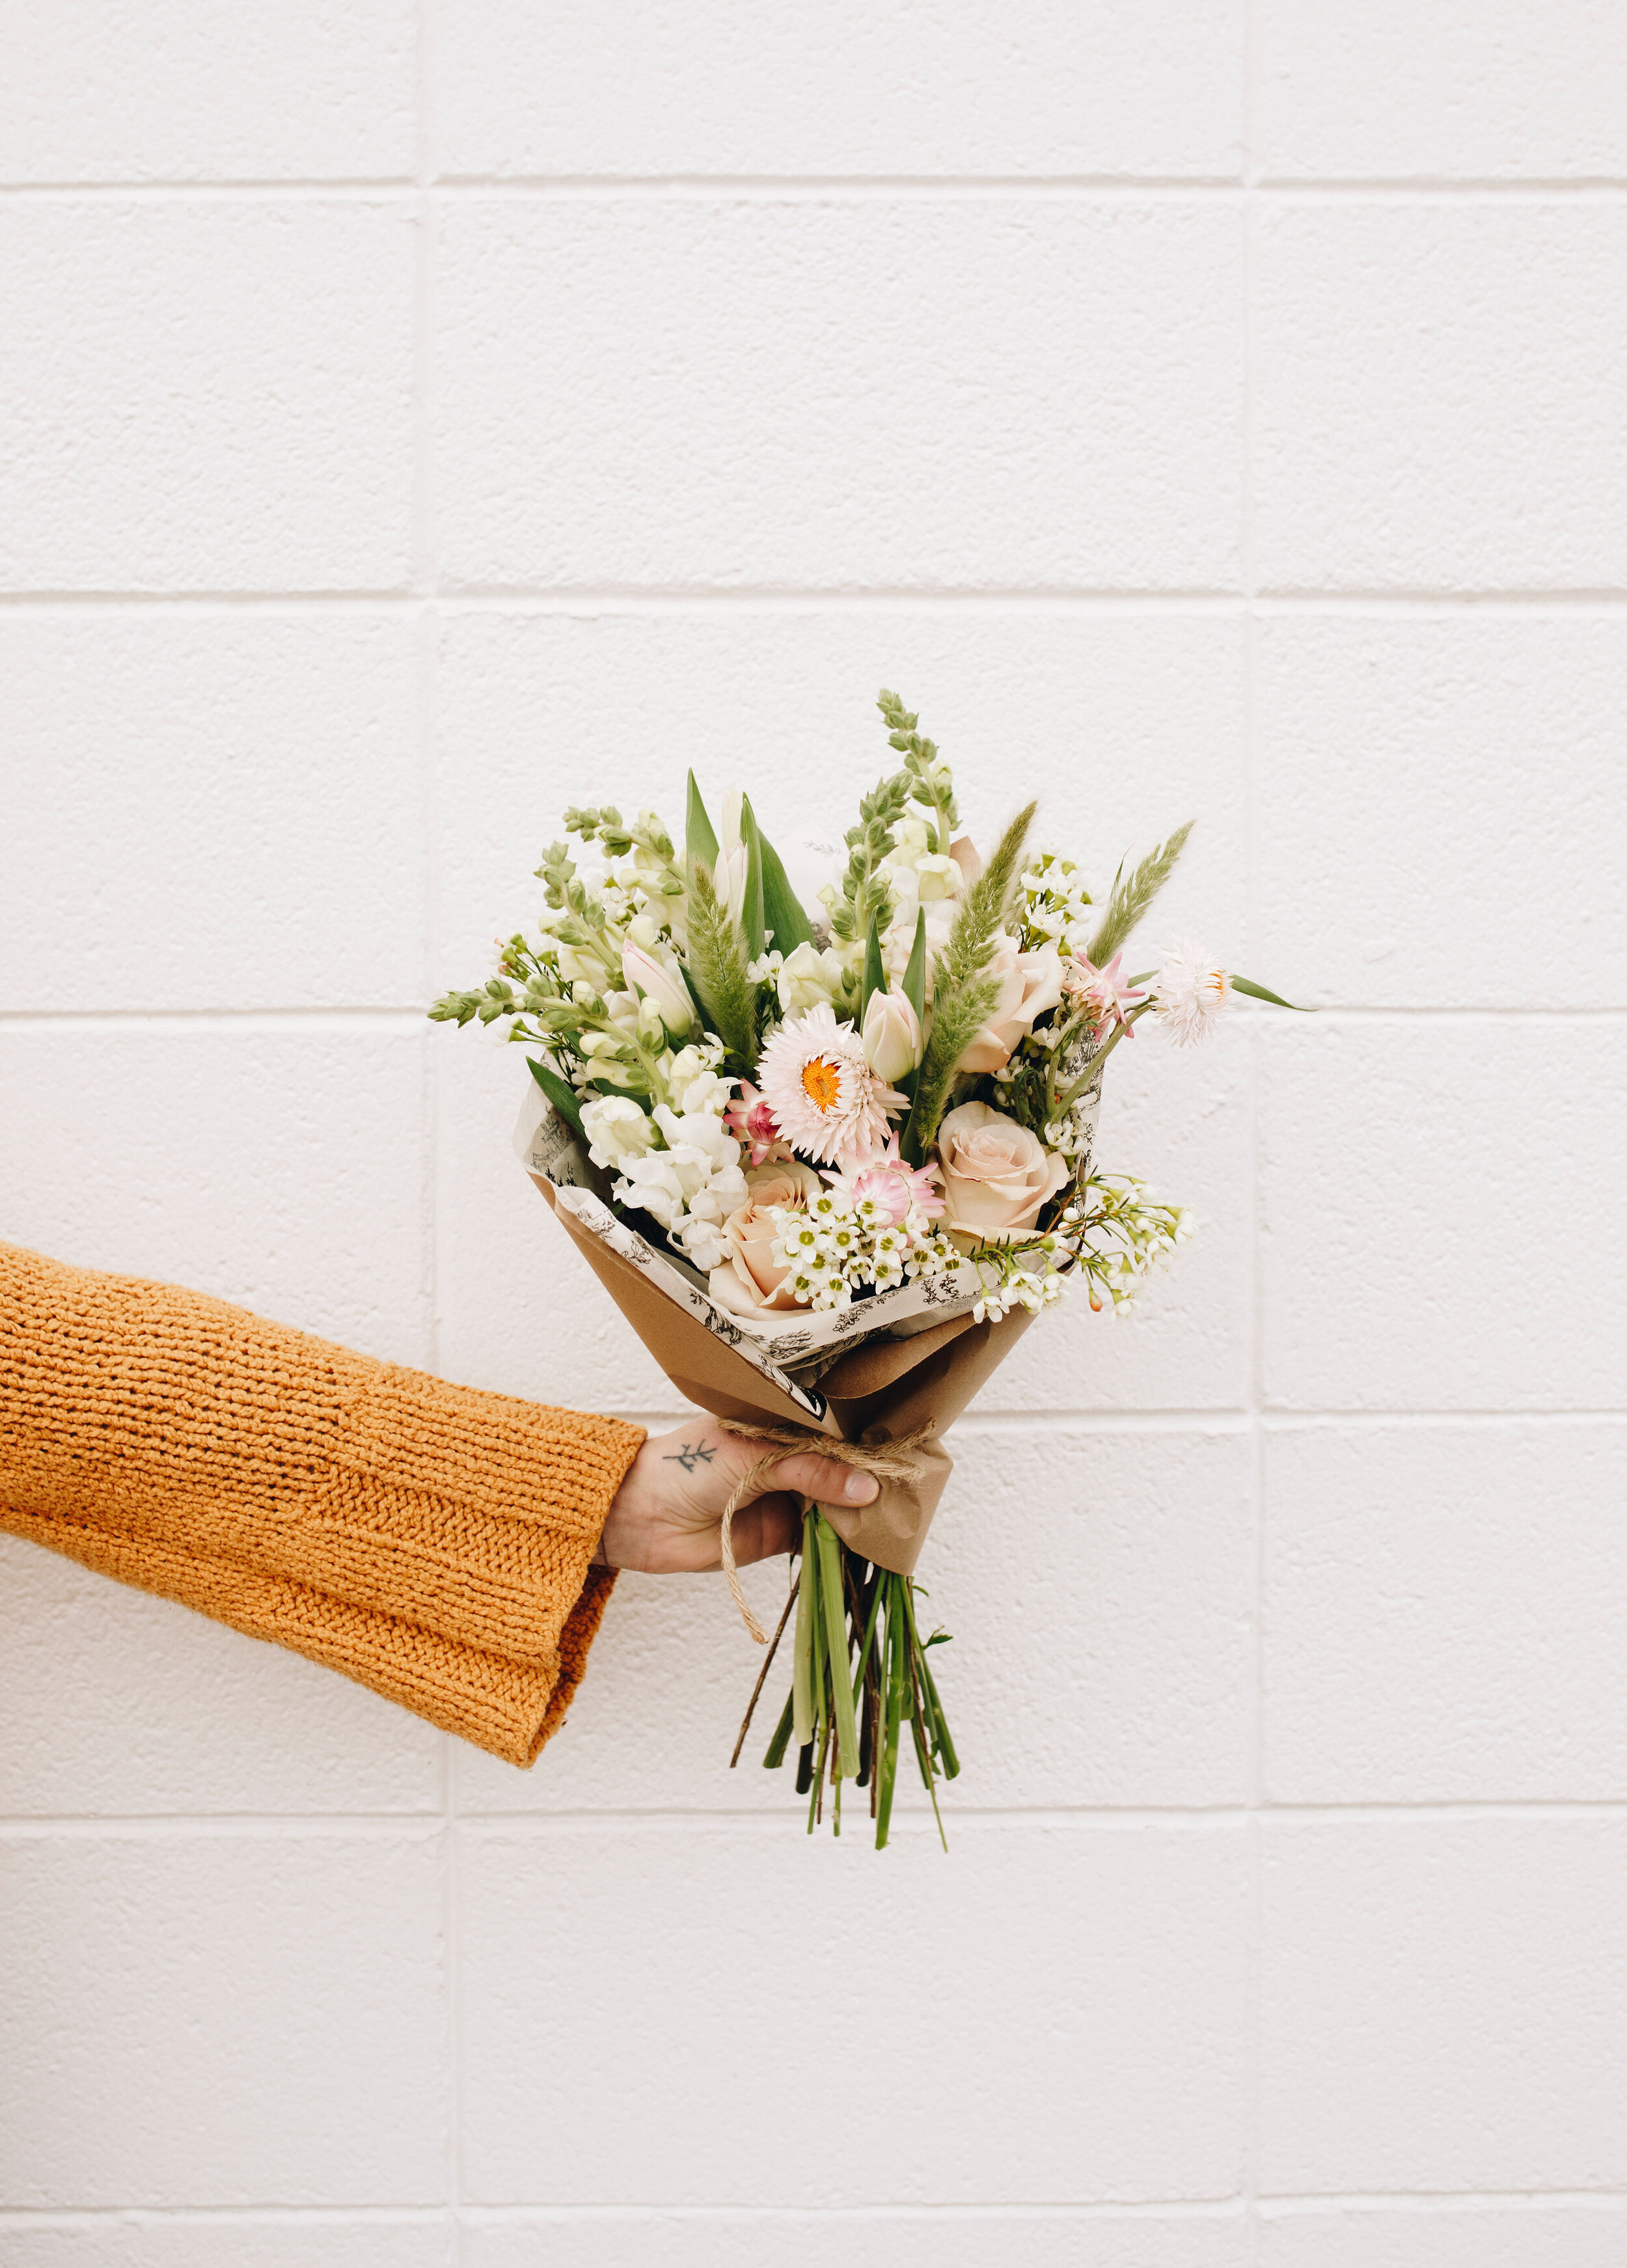 Sunday Bouquet: Brown Bagging It - StyleCarrot